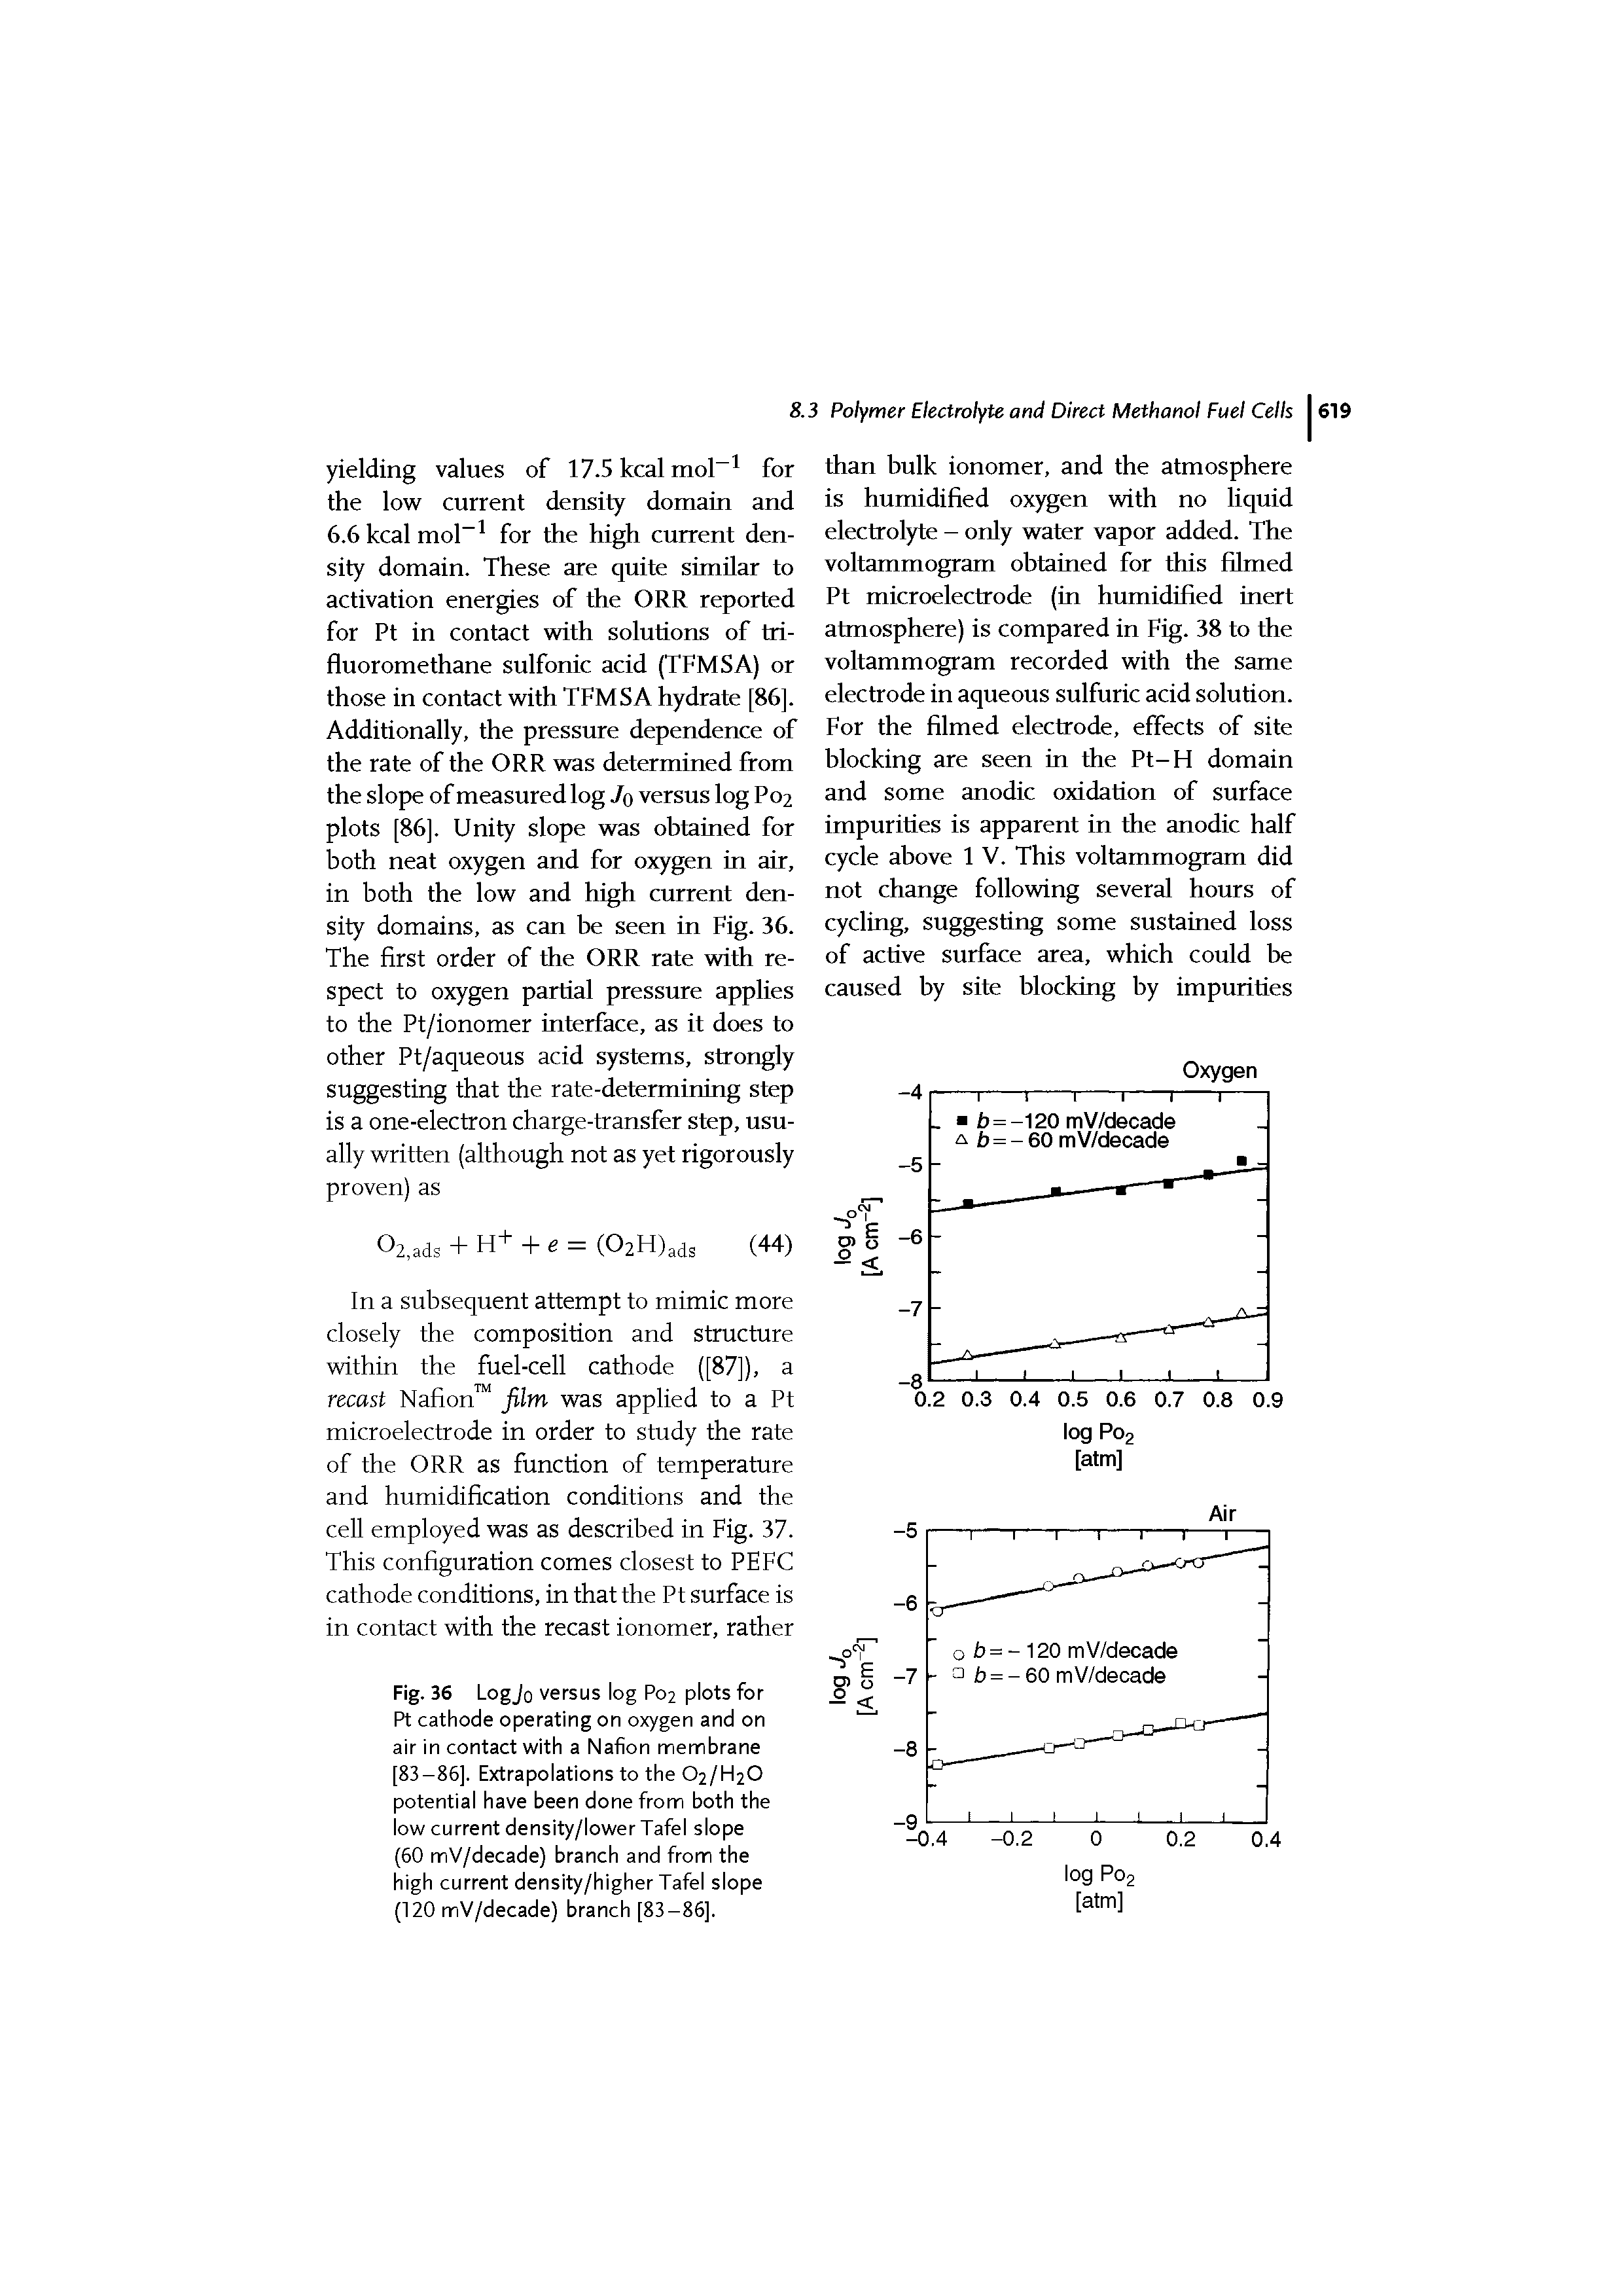 Fig. 36 Logjo versus log P02 plots for Pt cathode operating on oxygen and on air in contact with a Nation membrane [83-86], Extrapolations to the O2/H2O potential have been done from both the low current density/lowerTafel slope (60 mV/decade) branch and from the high current density/higher Tafel slope (120 mV/decade) branch [83-86],...